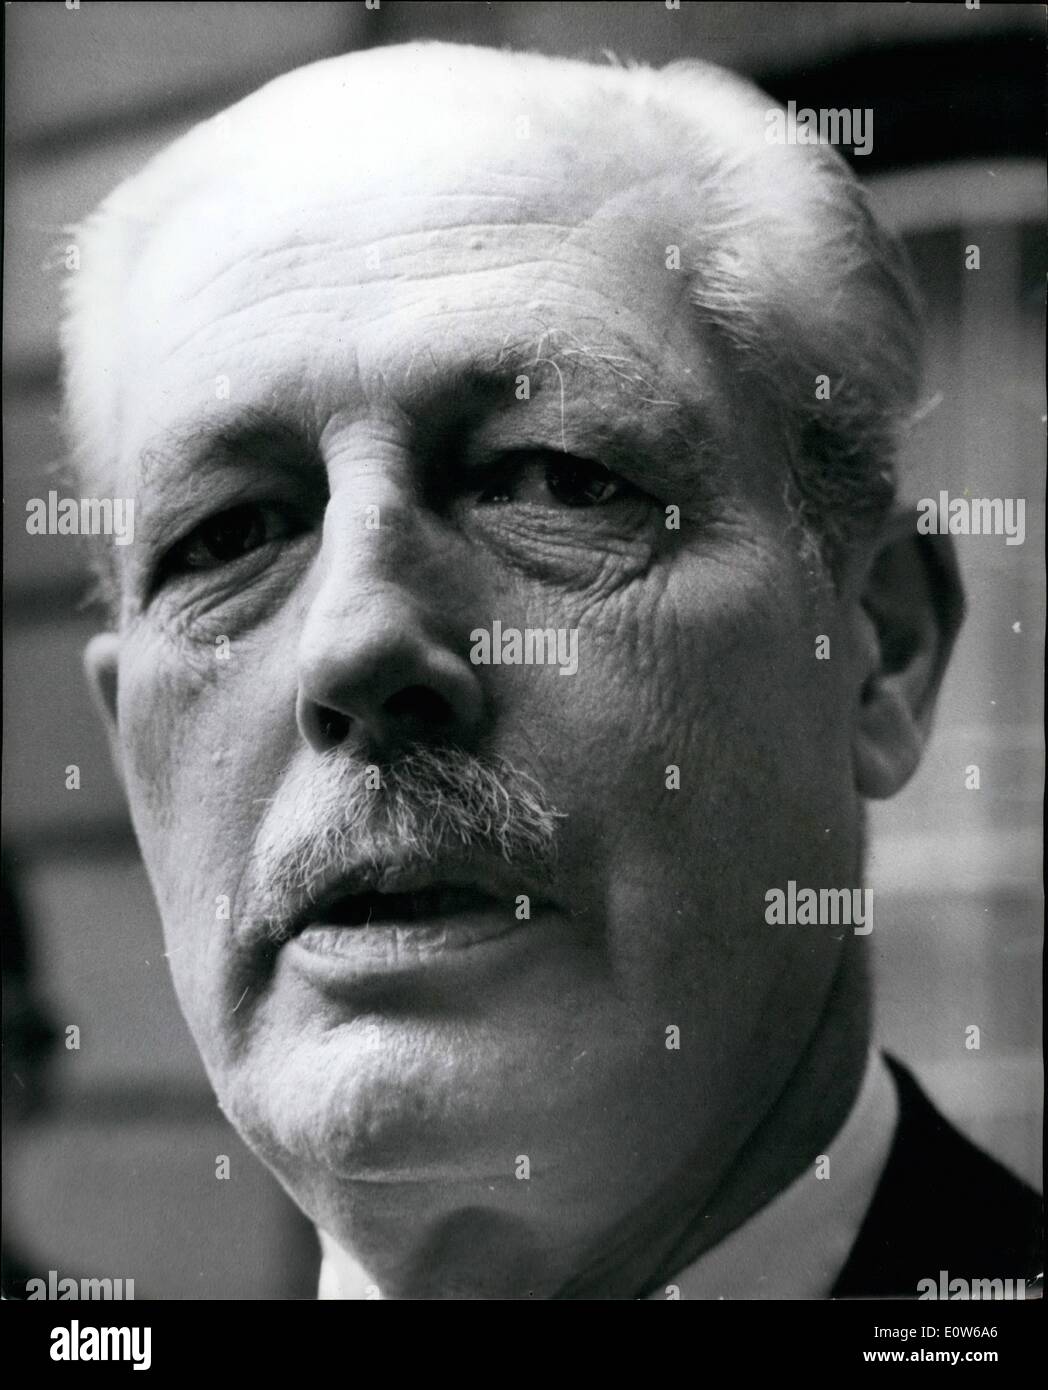 Aug. 08, 1961 - Macmillan goes to House of Commons for Common Market debate after heart attack rumour: Hours before Prime Minister Macmillan was to go to the House of Common for the first day of the Common Market debate, a rumour was circulated that he had suffered a heart attack. the rumour was promptly and emphatically denied by Admiralty House. Photo shows The Prime Minister leaving Admiralty House yesterday afternoon on his way to the House of Commons for the Common market debate Stock Photo